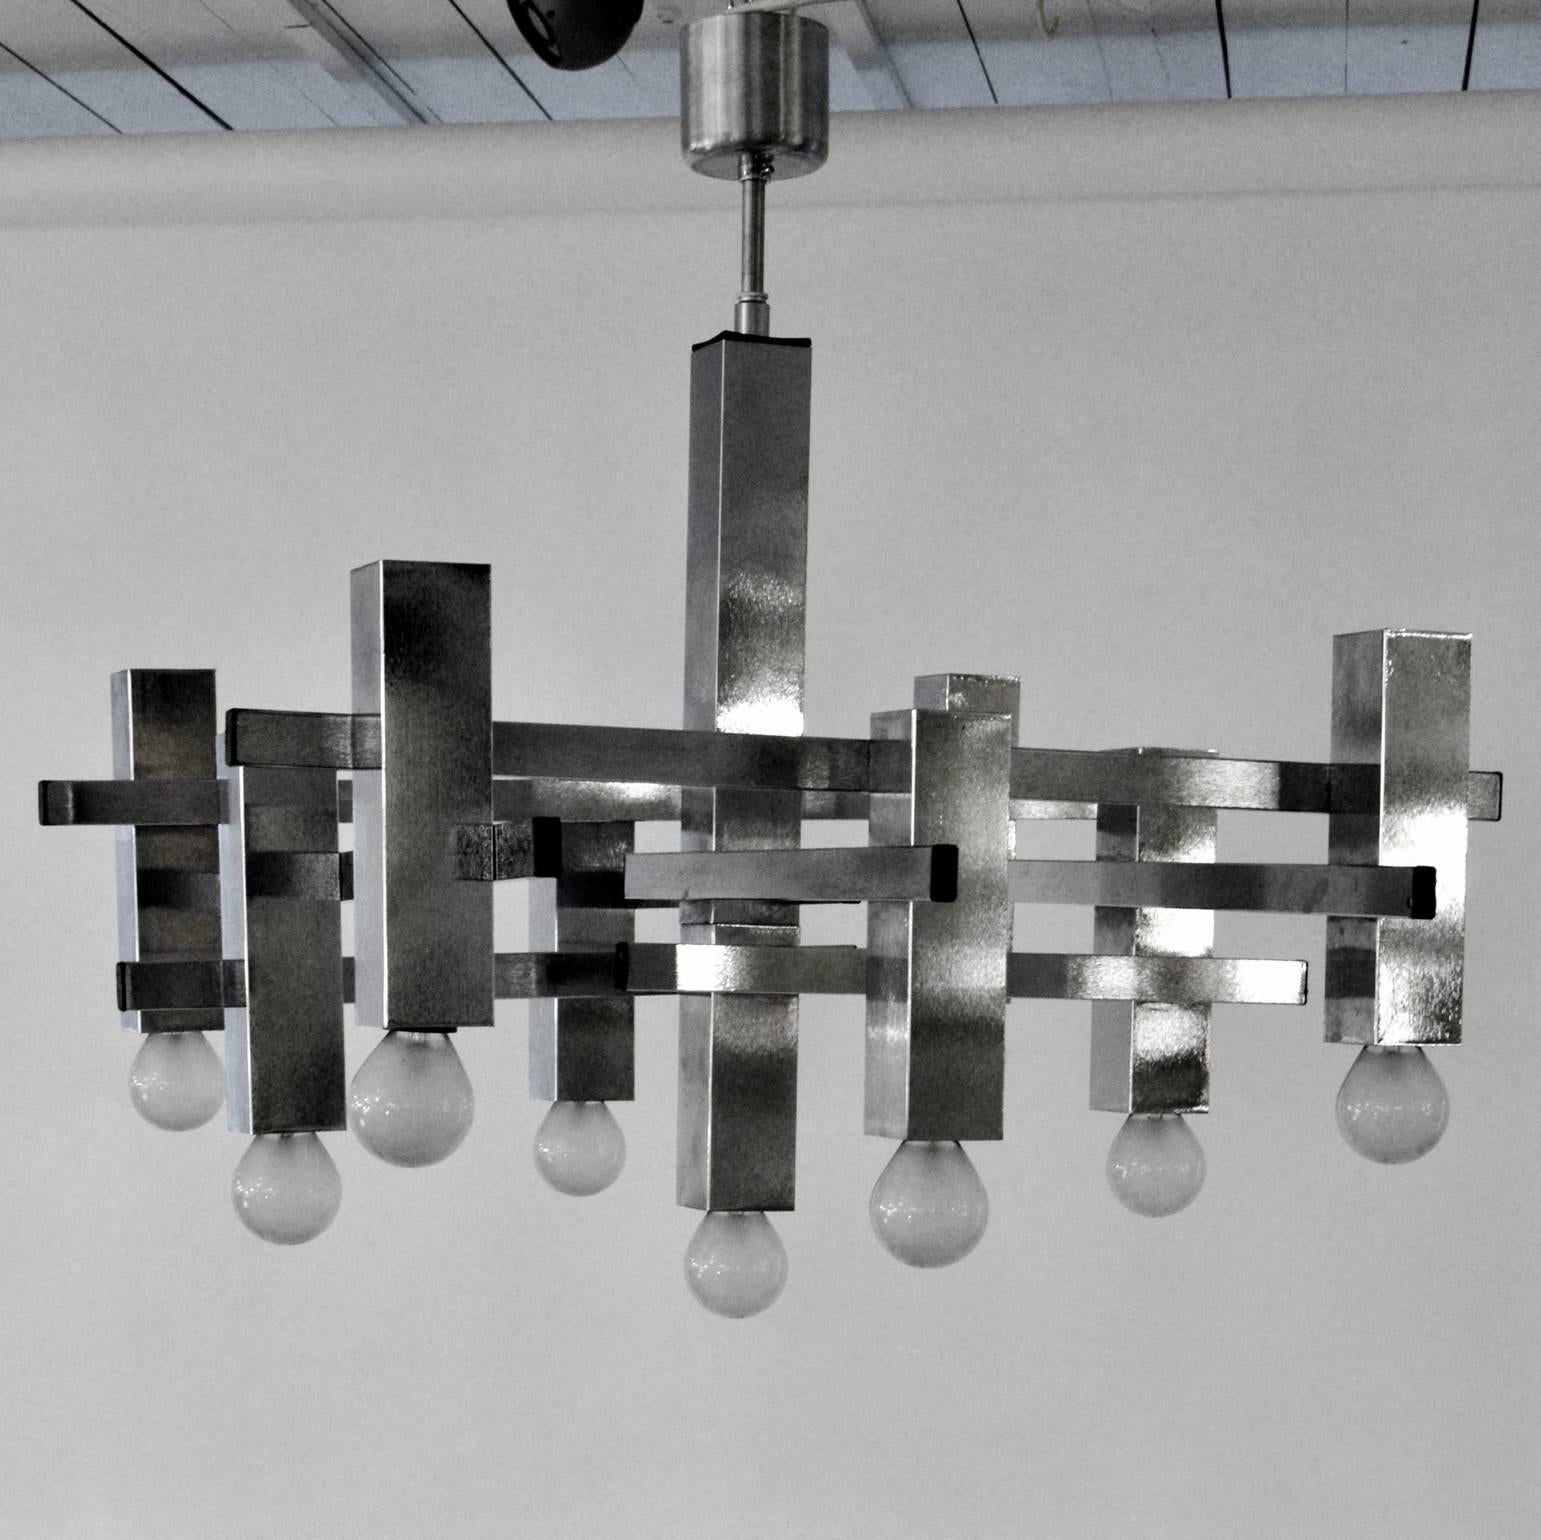 Geometric pair of brushed chrome chandeliers with nine lights, style of Sciolari, Belgian, 1970s.

The height can be adjusted on request.
The lights are rewired and ready for immediate use.